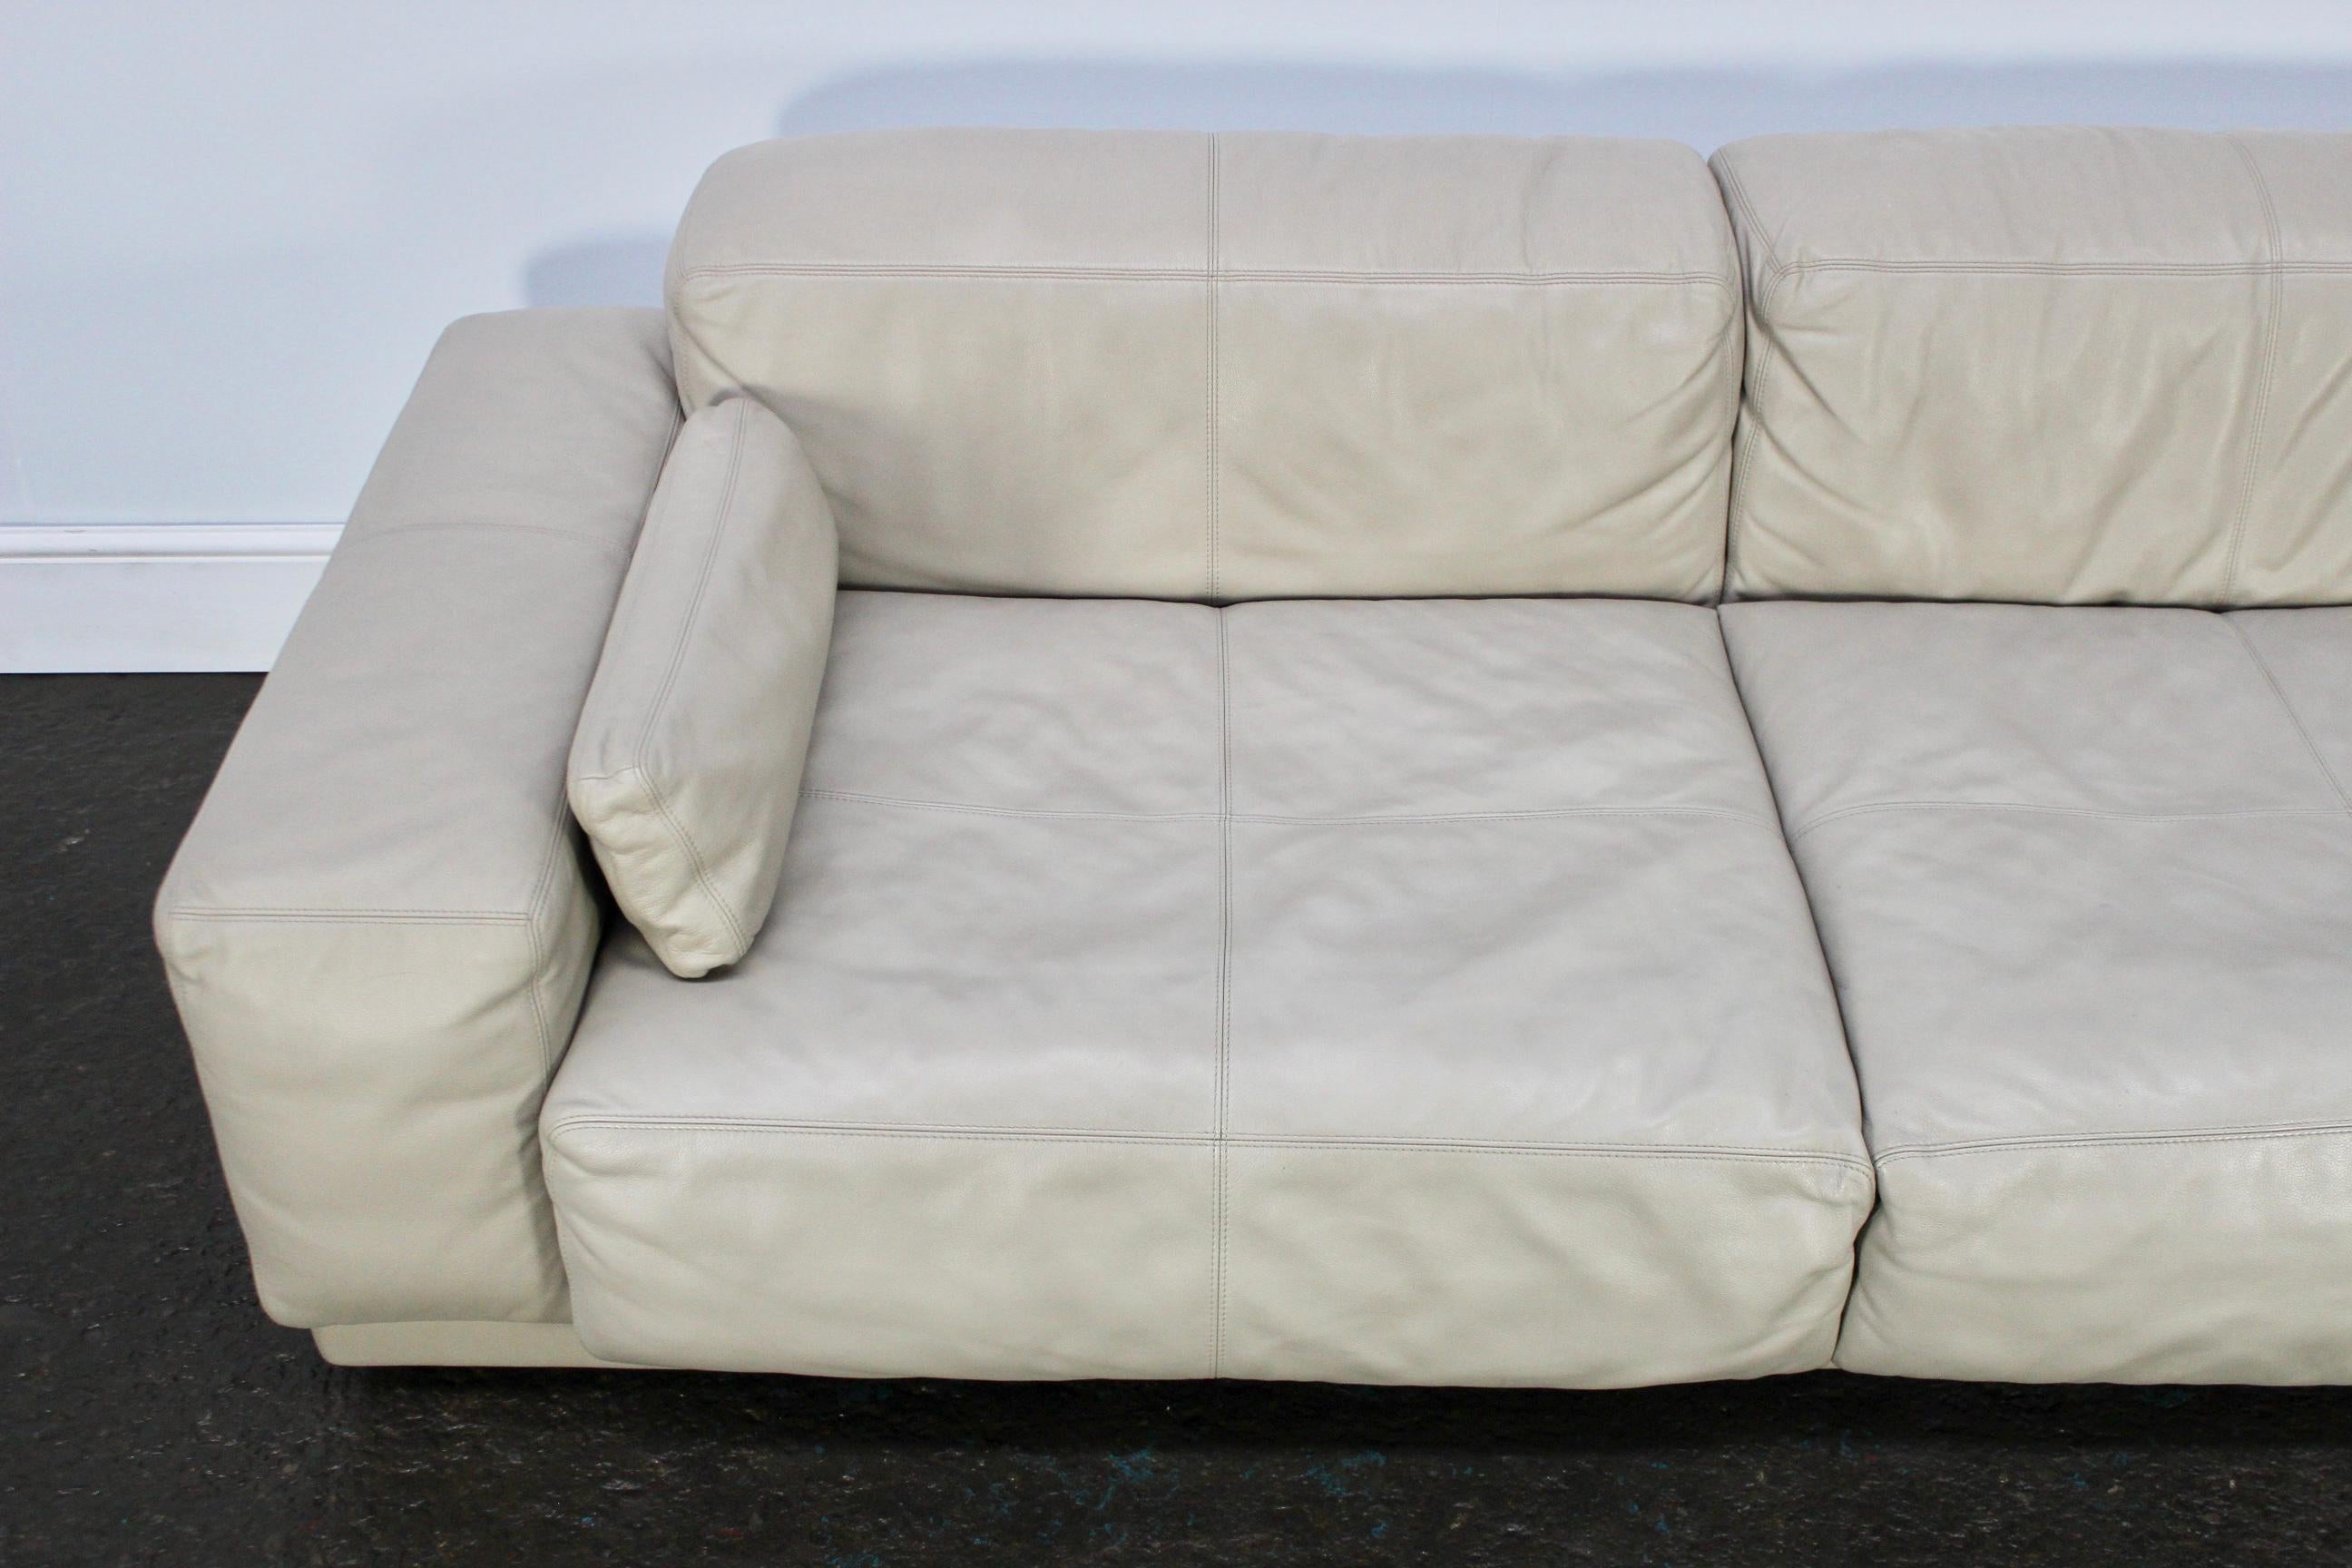 Hand-Crafted Vitra “Place” Two-Seat Sofa in Ivory Leather by Jasper Morrison